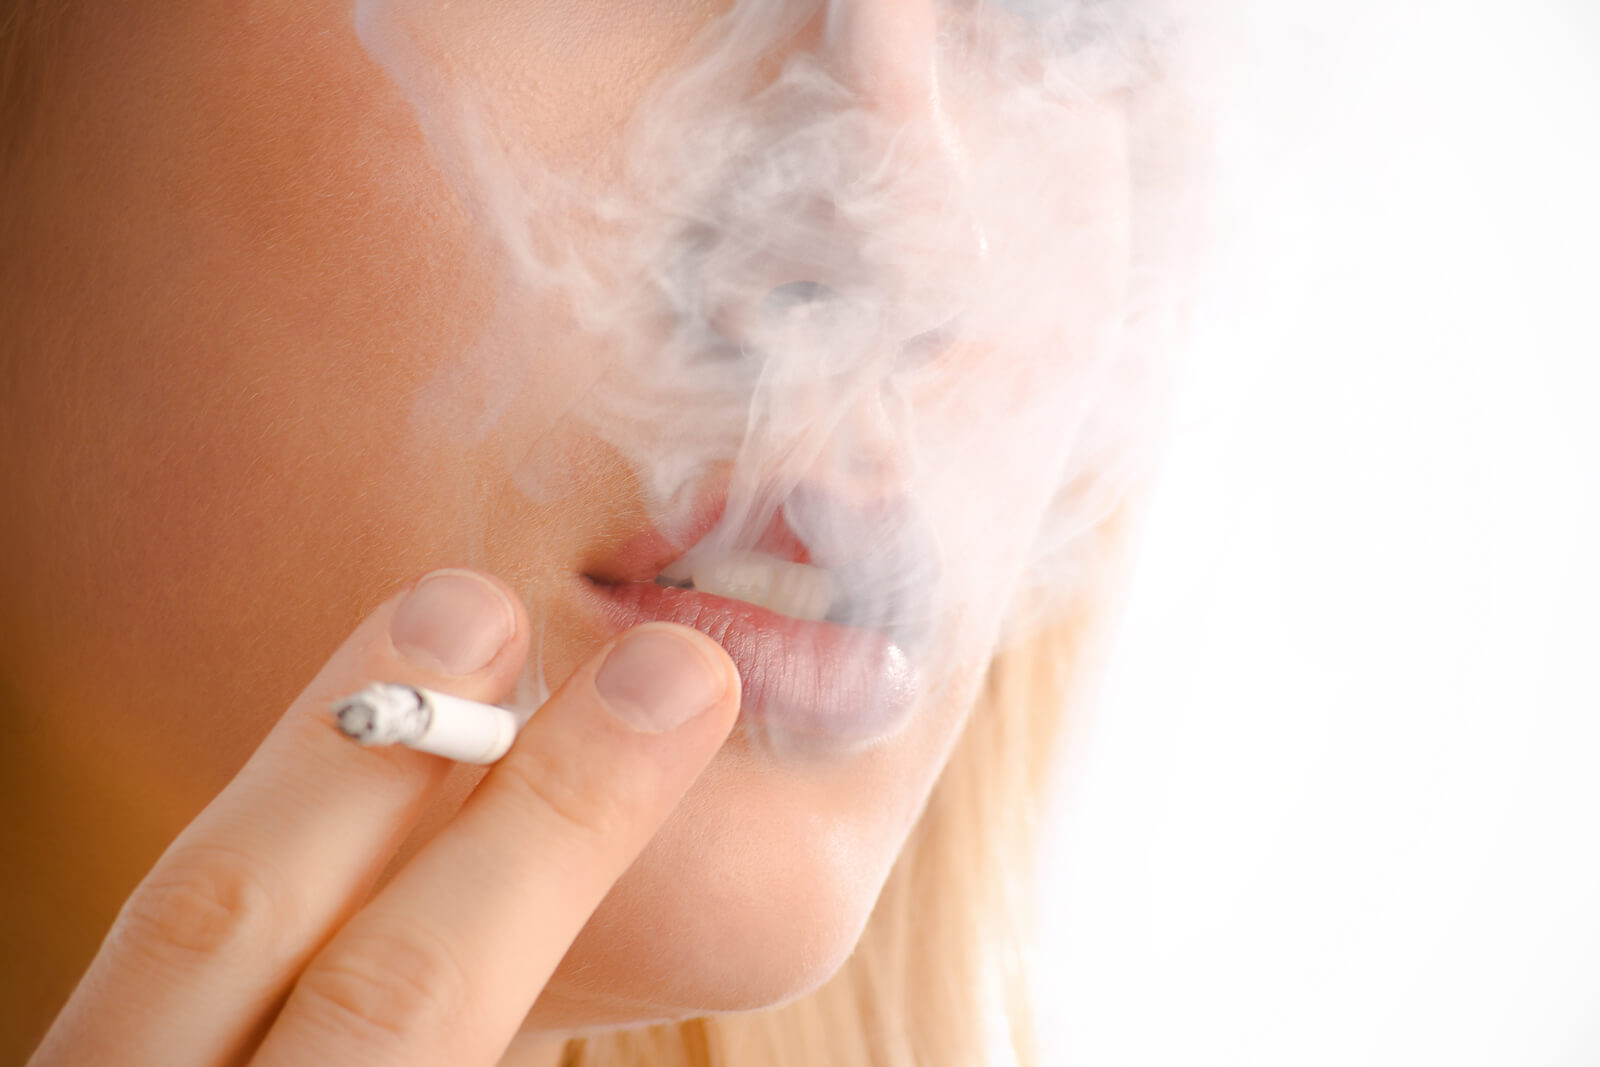 Featured image for “Smokers May Face a Greater Risk for Hearing Loss, Study Suggests”